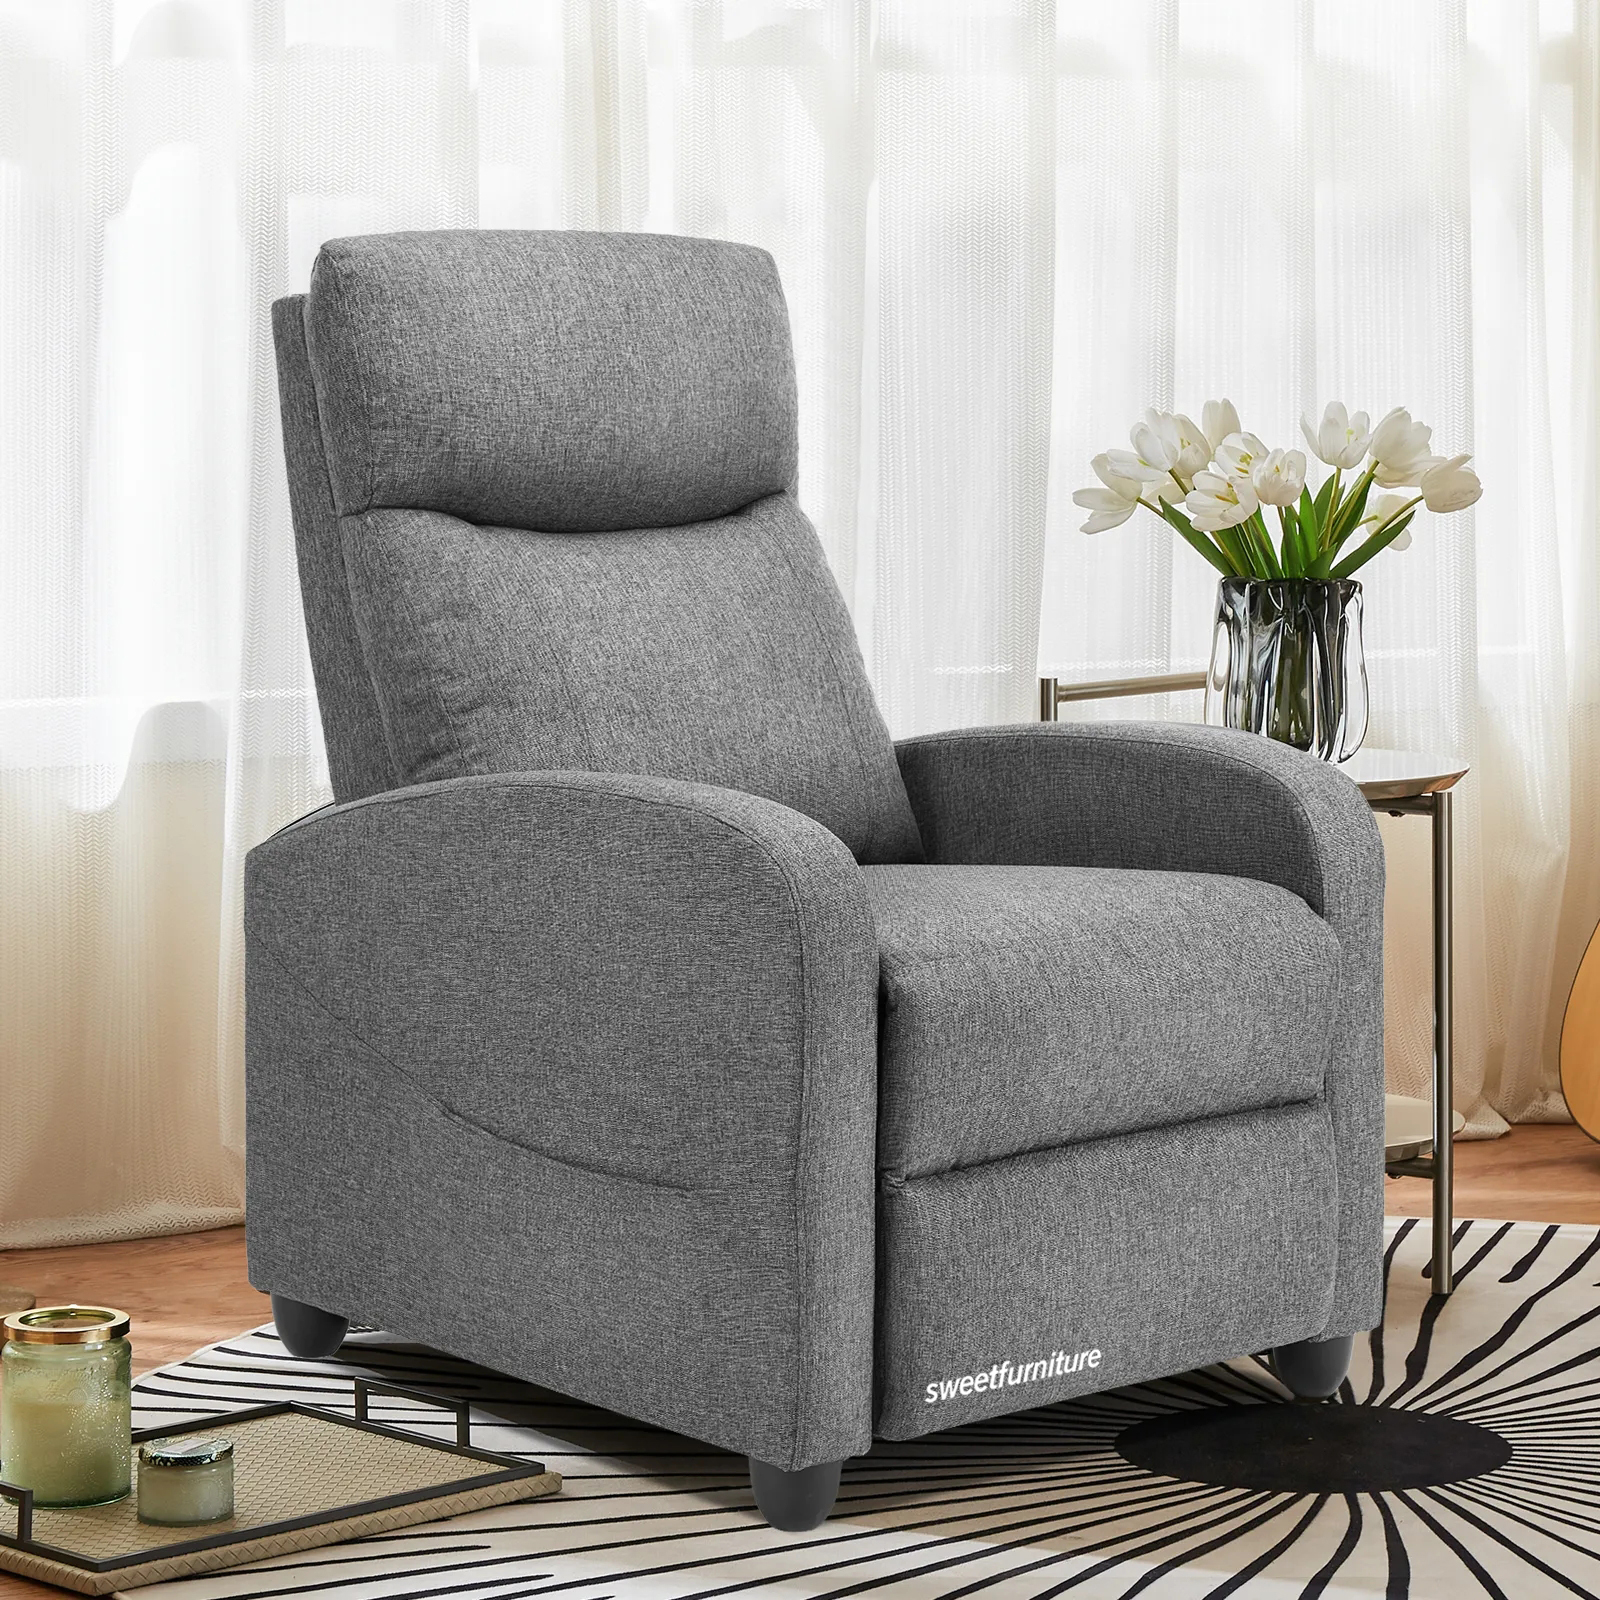 Recliner Chair for Adults, Massage Reclining Chair for Living Room